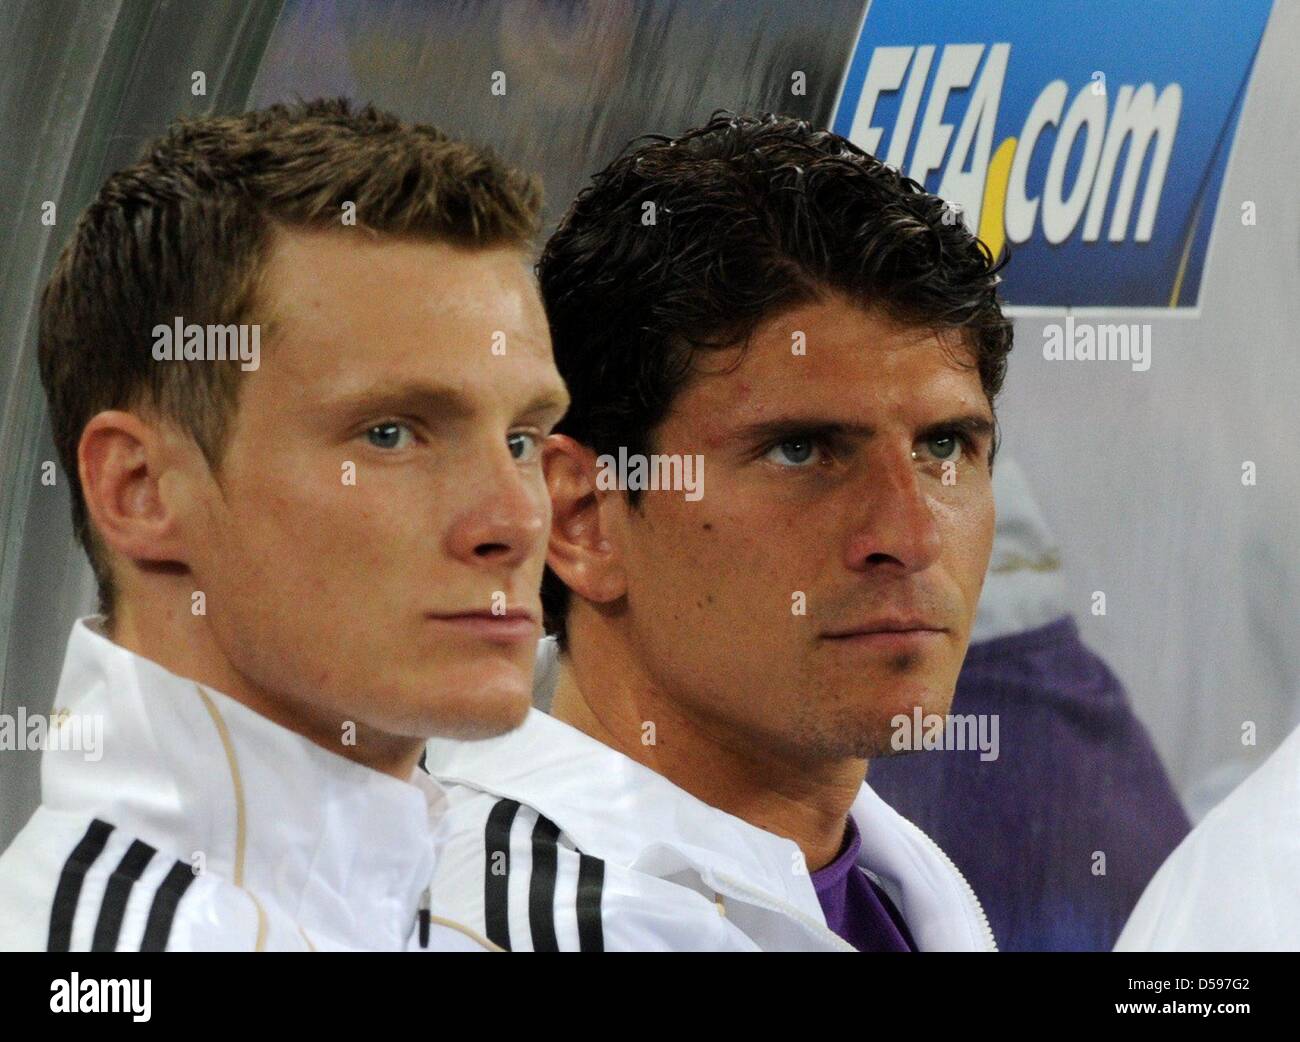 Germany's substitute player Marcell Jansen (L) and Mario Gomez sit on the bench during the 2010 FIFA World Cup group D match between Germany and Australia at Durban Stadium in Durban, South Africa 13 June 2010. Germany won 4-0. Photo: Marcus Brandt dpa - Please refer to http://dpaq.de/FIFA-WM2010-TC Stock Photo